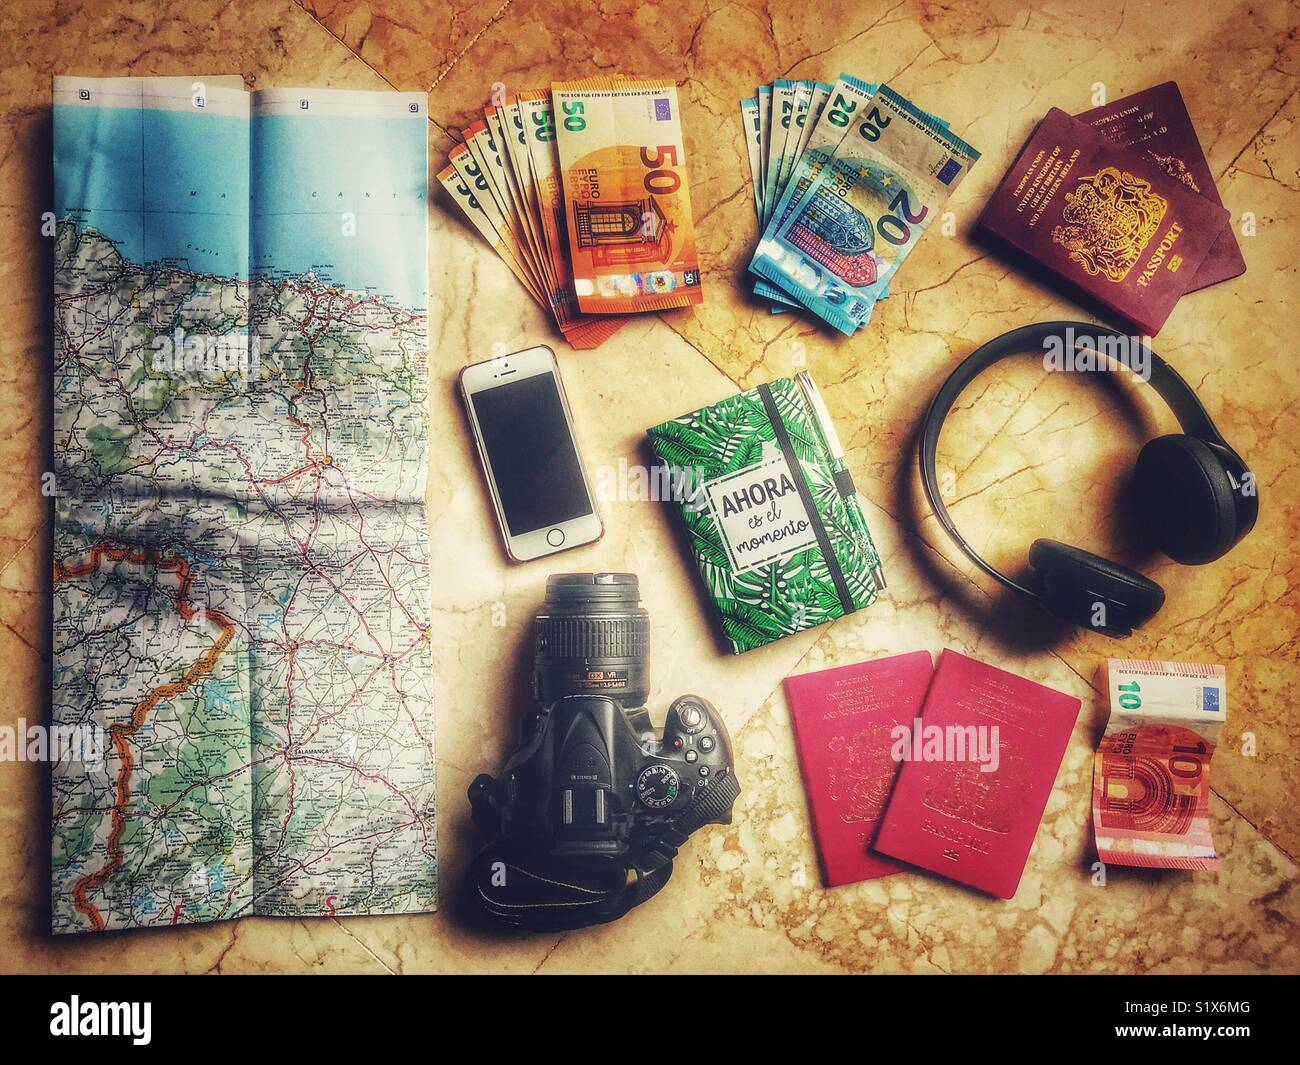 Flatlay photography, travel items including map, passports, DSLR camera, Beat headphones, notebooks, iPhone, and euros. Stock Photo